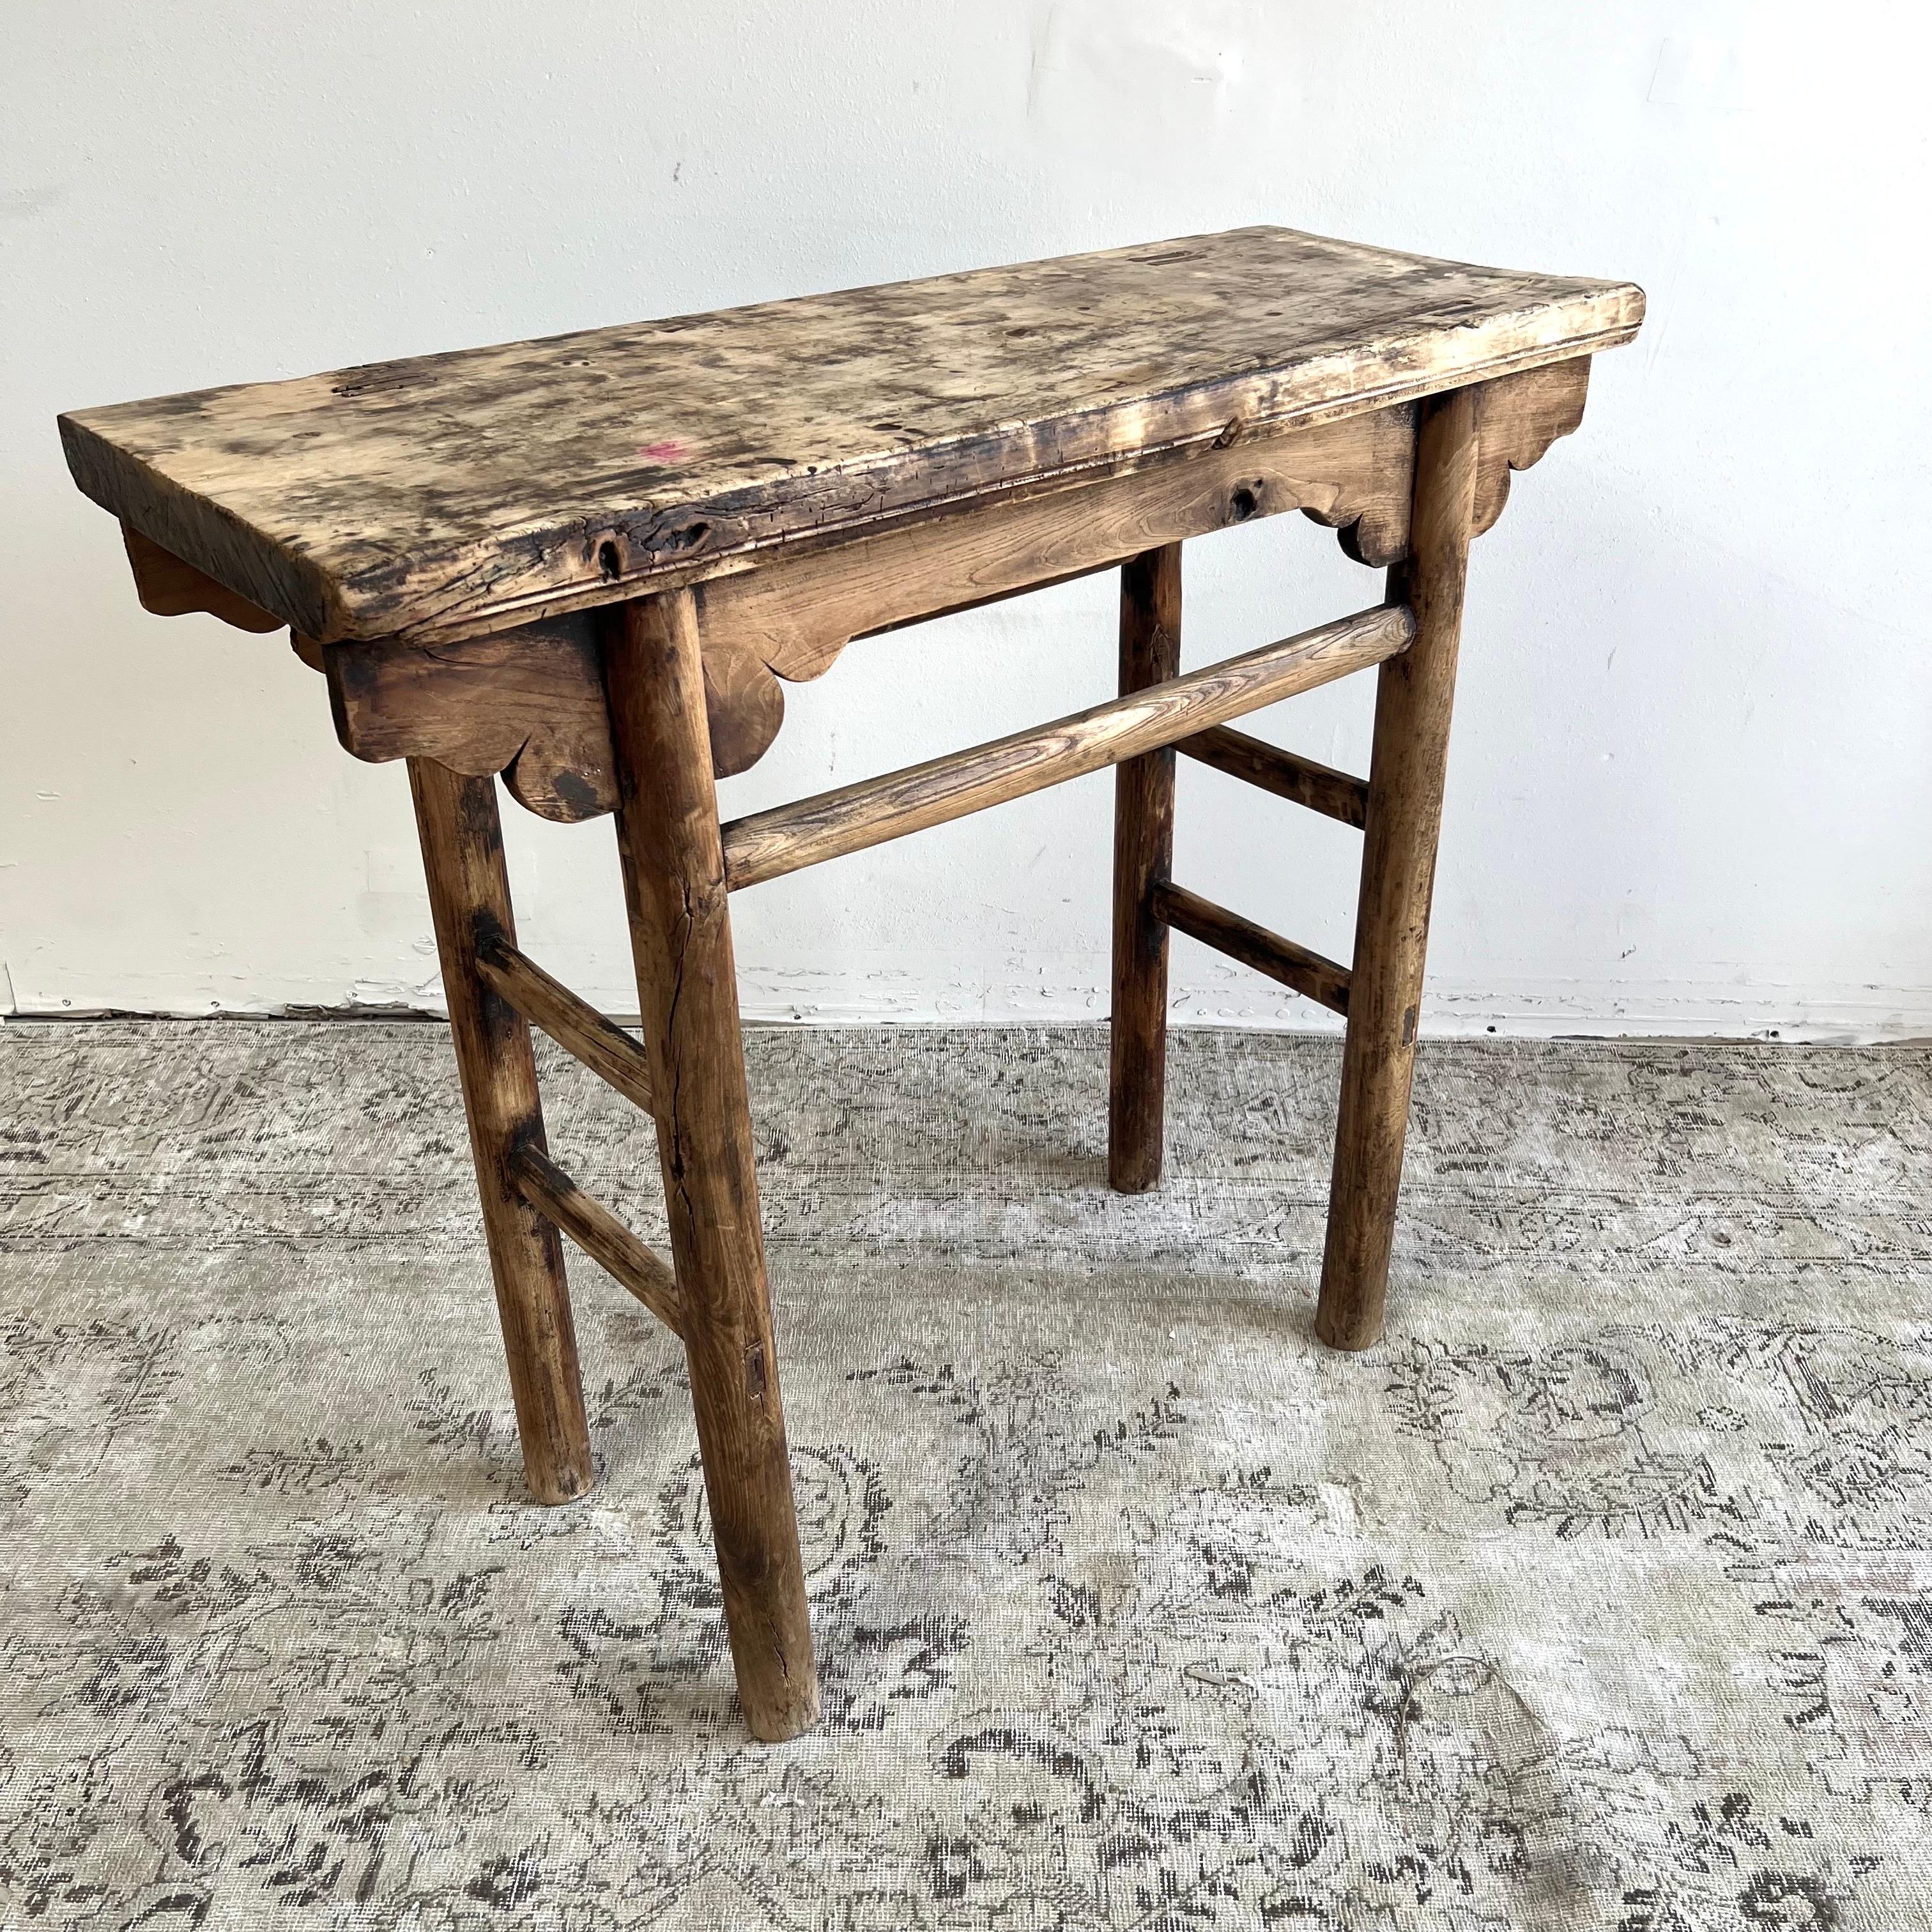 Vintage antique elm wood console table Beautiful antique patina, with weathering and age, these are solid and sturdy ready for daily use, use as a entry table, sofa table or console in a dining room. Great in a living room with baskets or ottomans